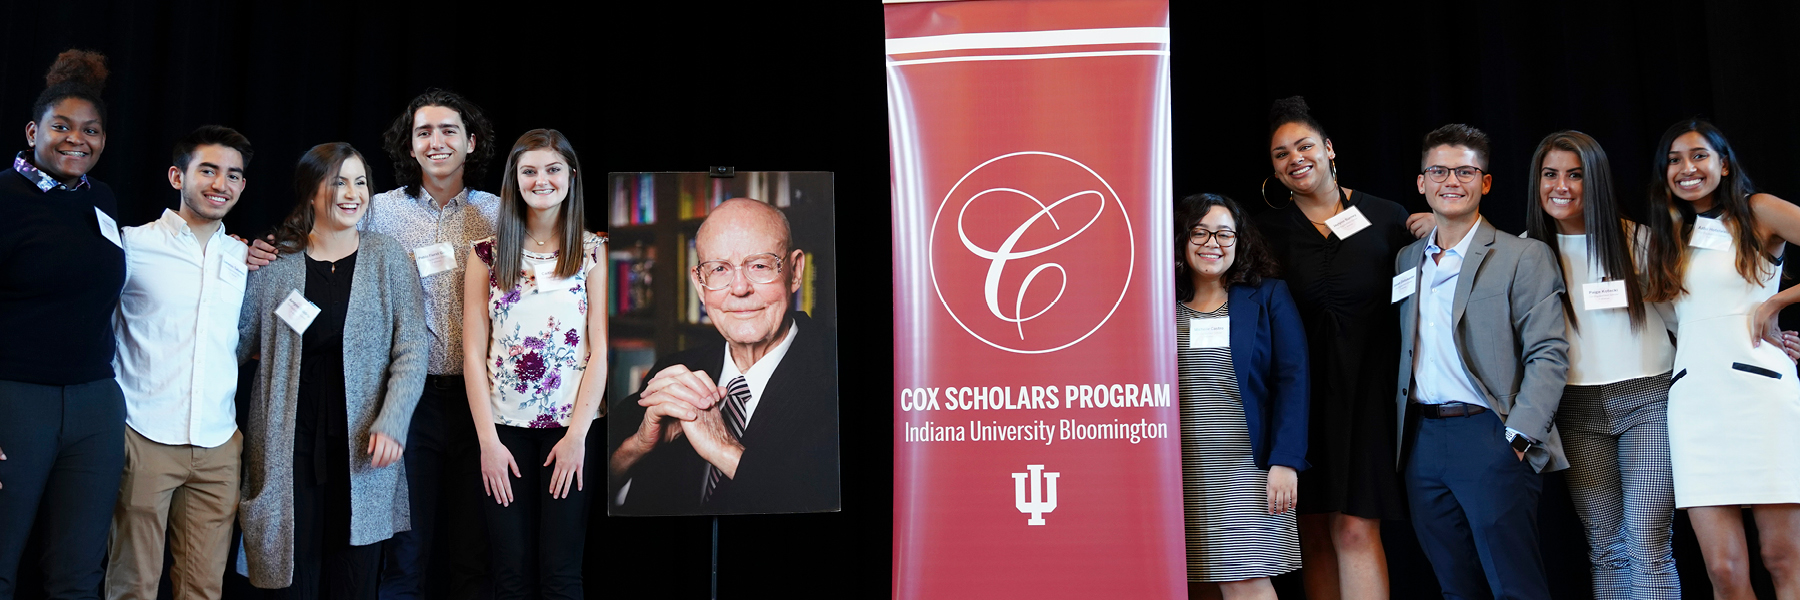 Cox Scholars standing next to a large photo of Jesse Cox